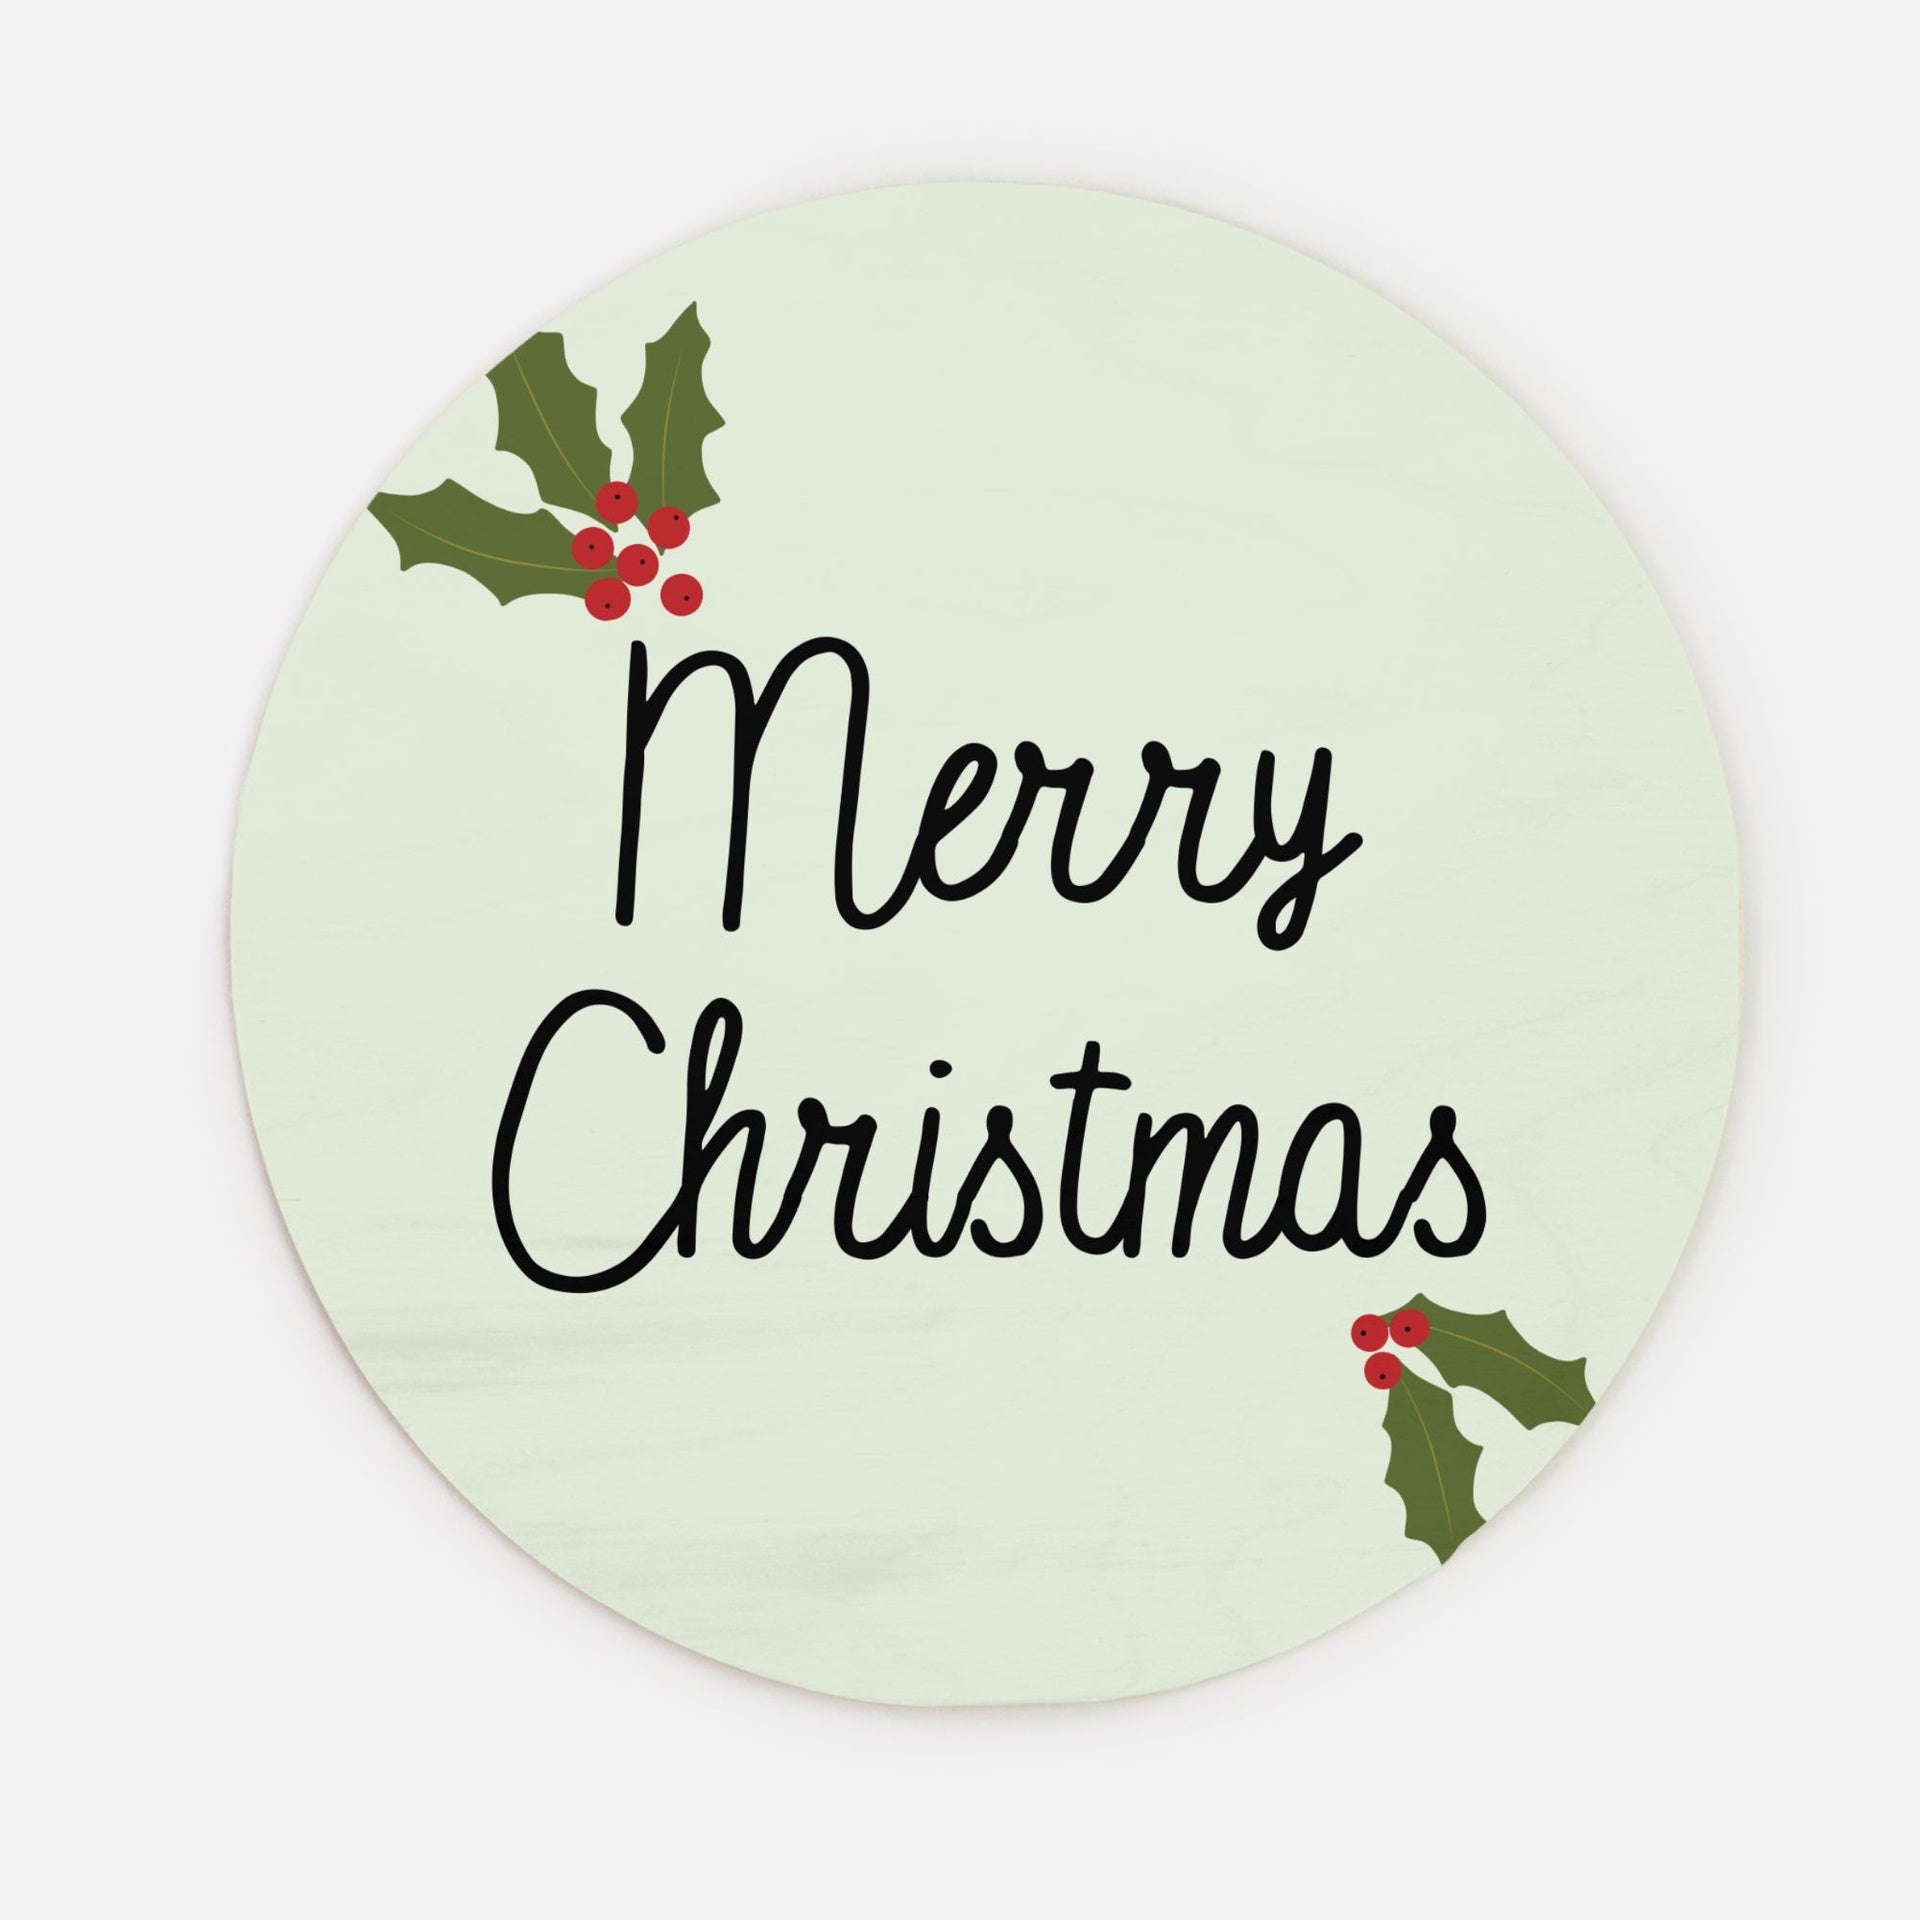 10" Round Wood Sign - Holly Merry Christmas